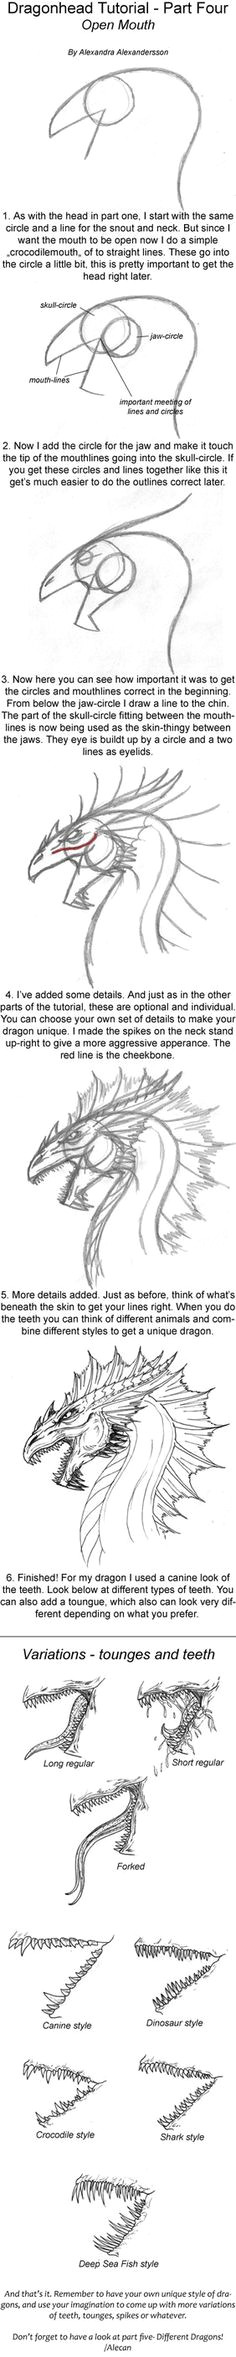 Drawing Dragons Tutorial 49 Best Fantasy Anatomy Images Mythological Creatures Drawings